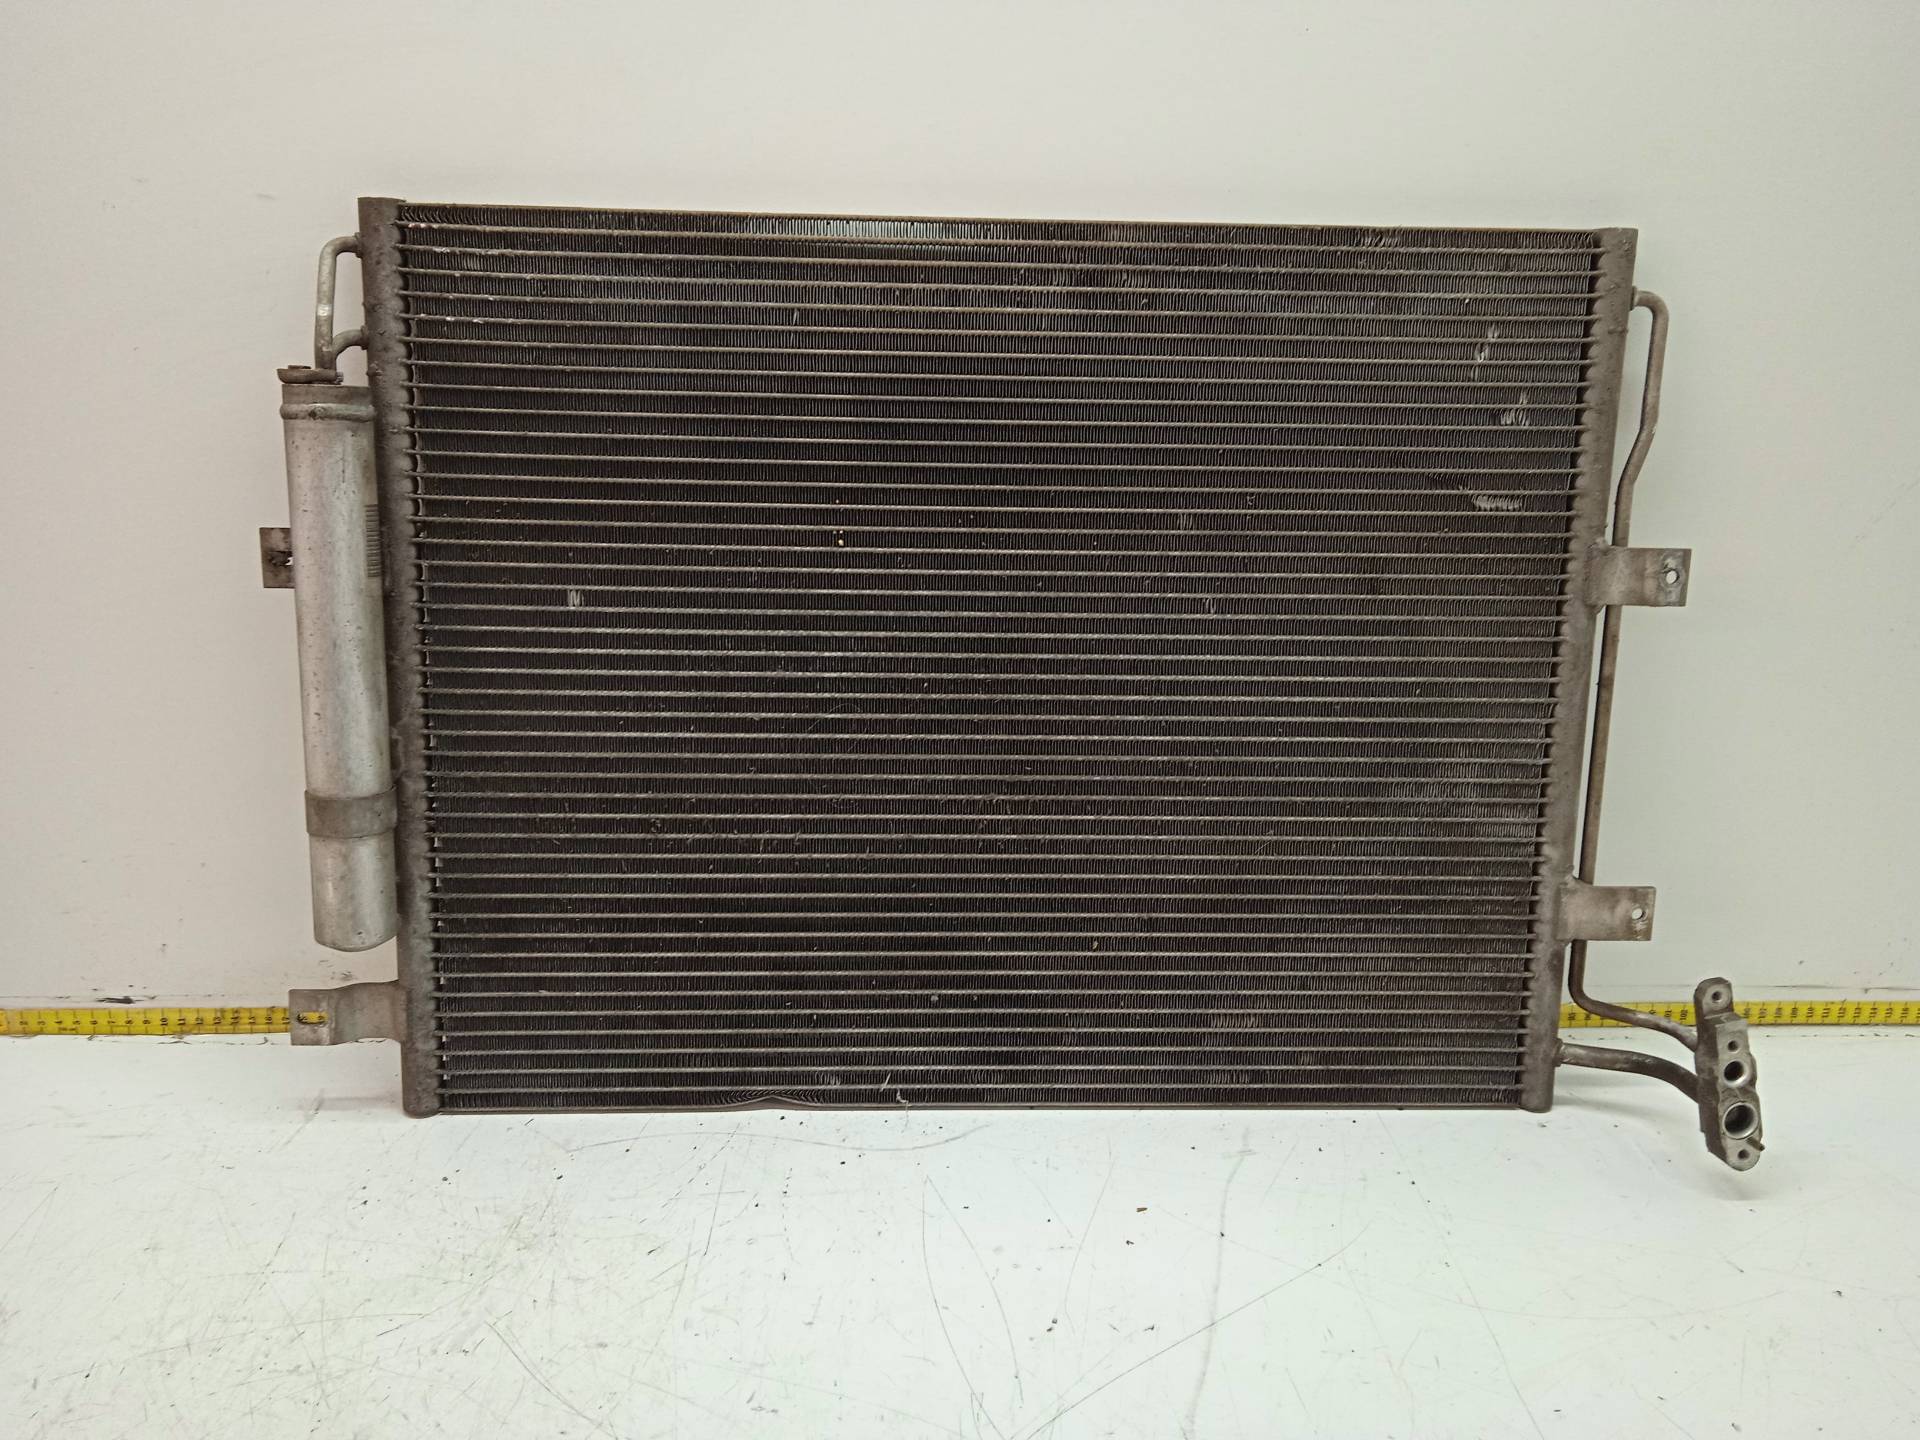 LAND ROVER Discovery 4 generation (2009-2016) Air Con Radiator AH3219C600CA 24329931